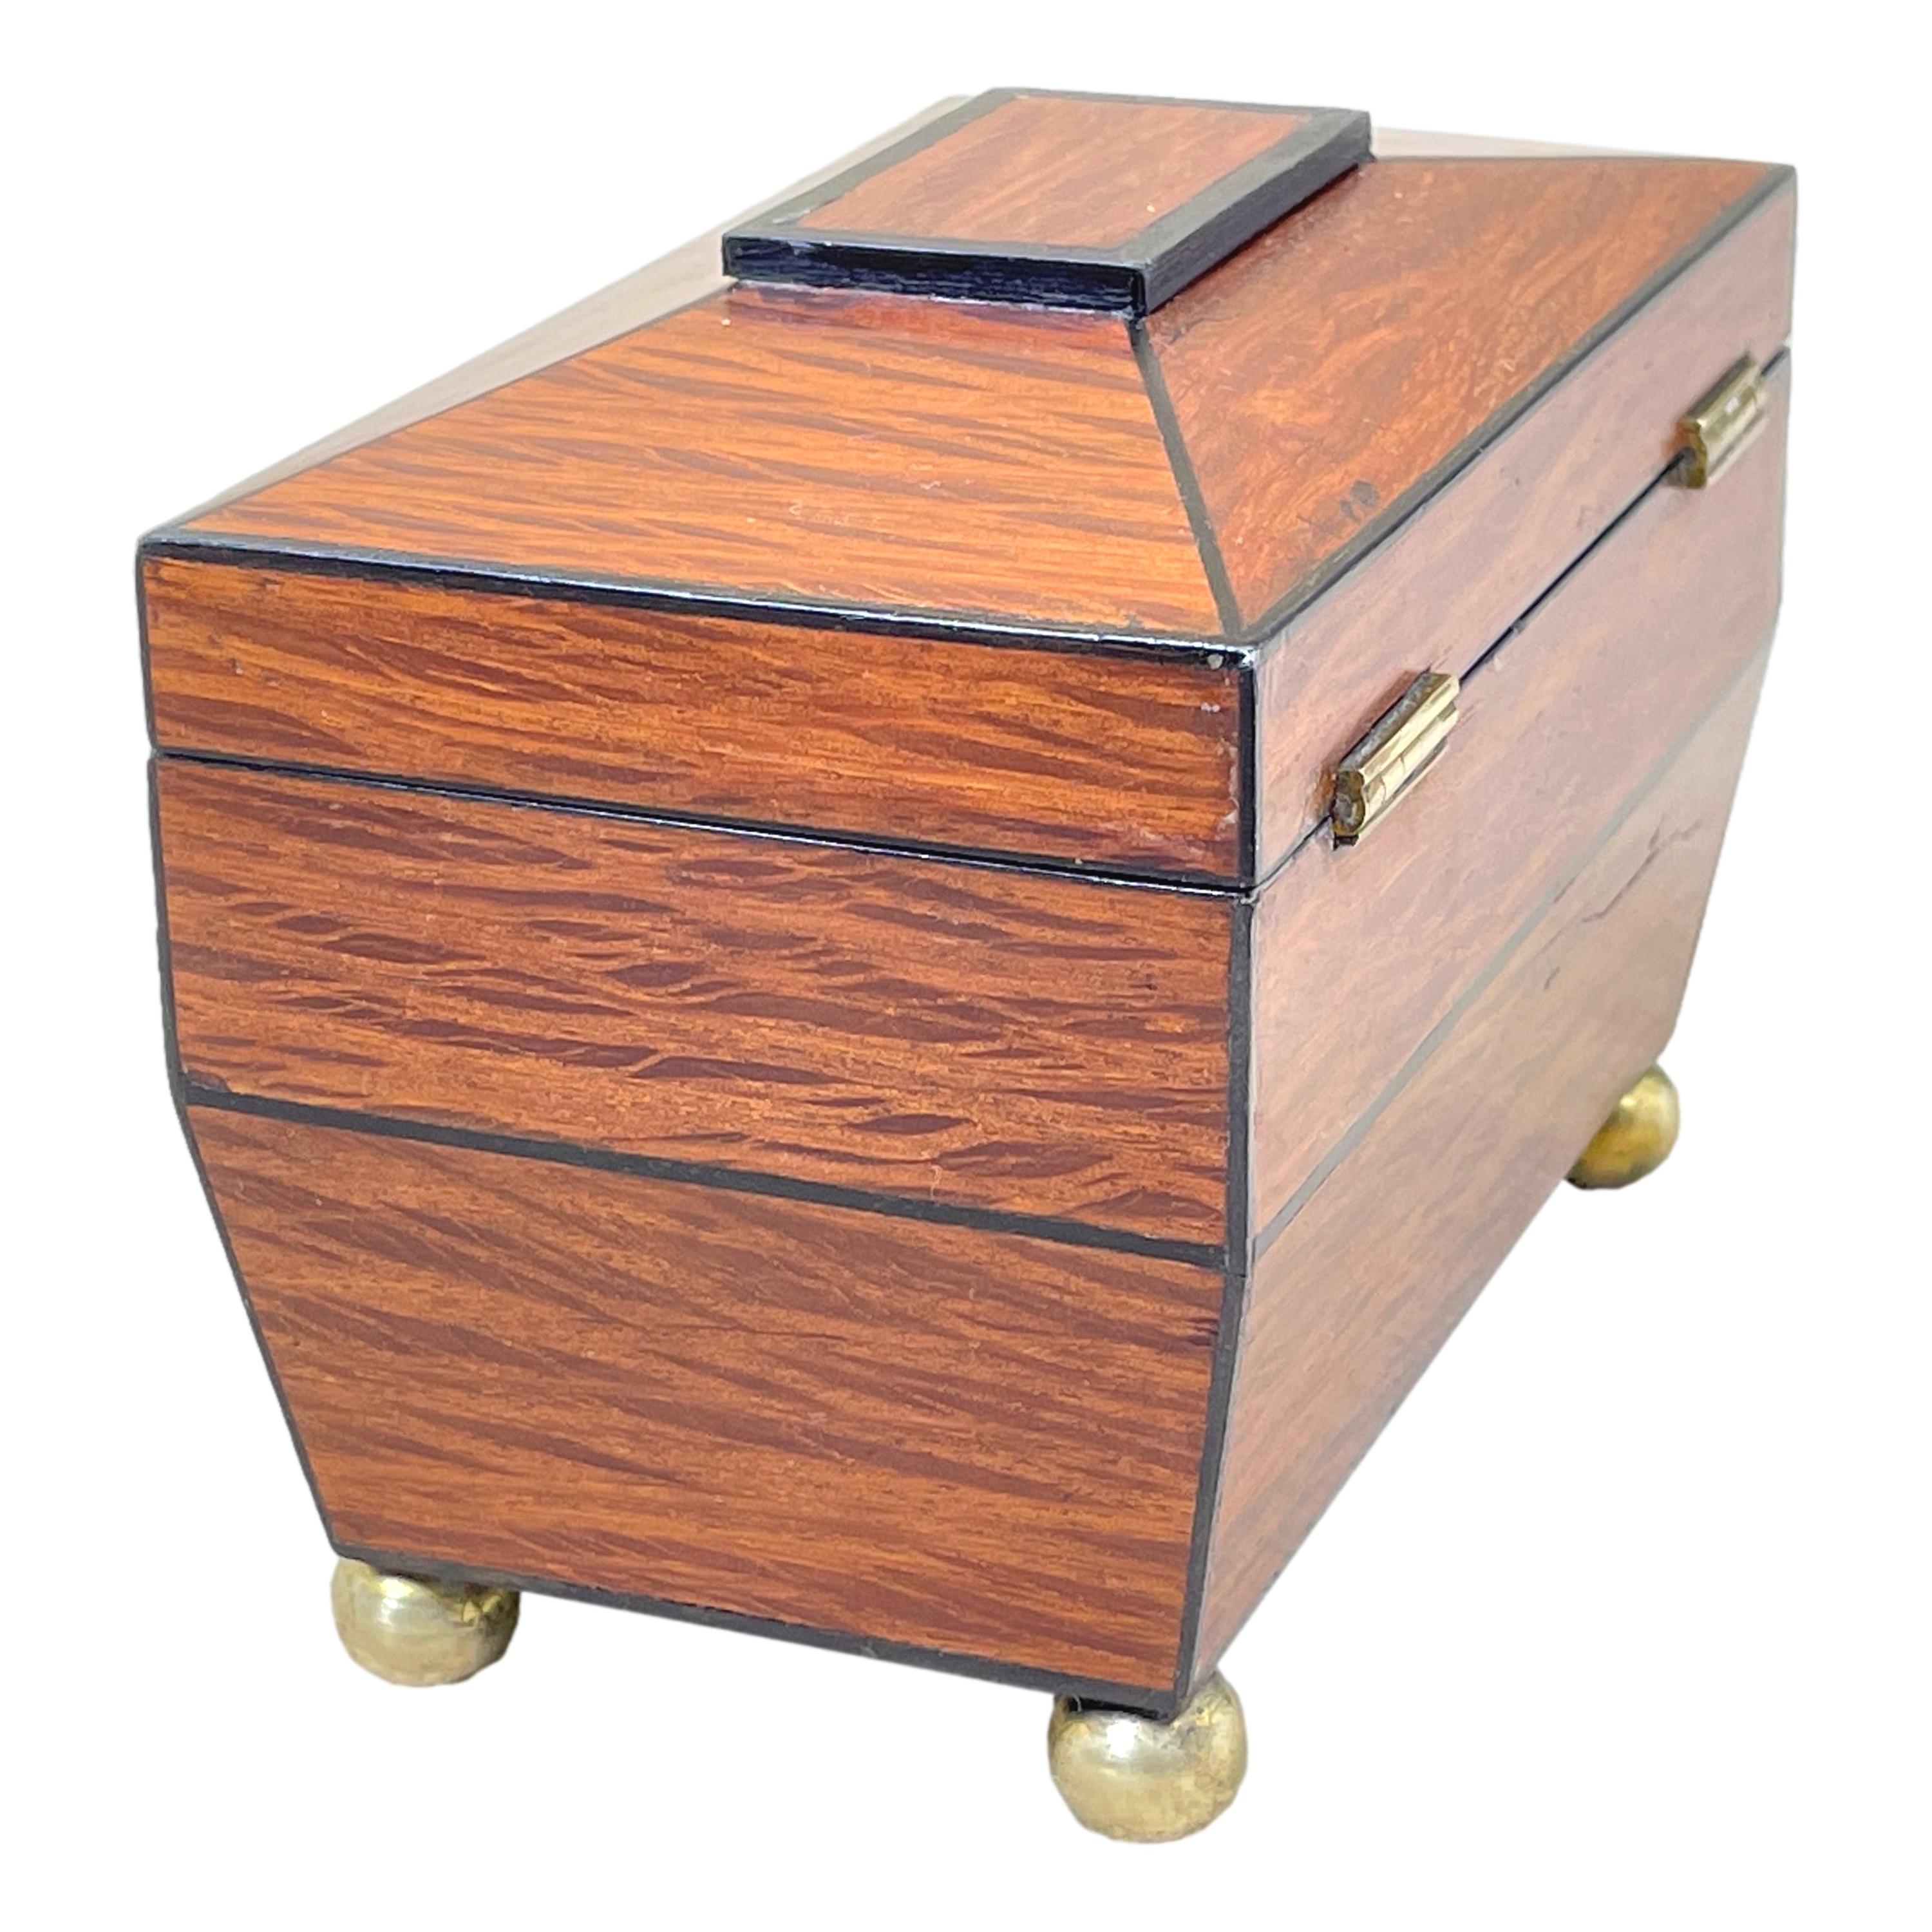 Other Tiny Regency Partridgewood Tea Caddy For Sale